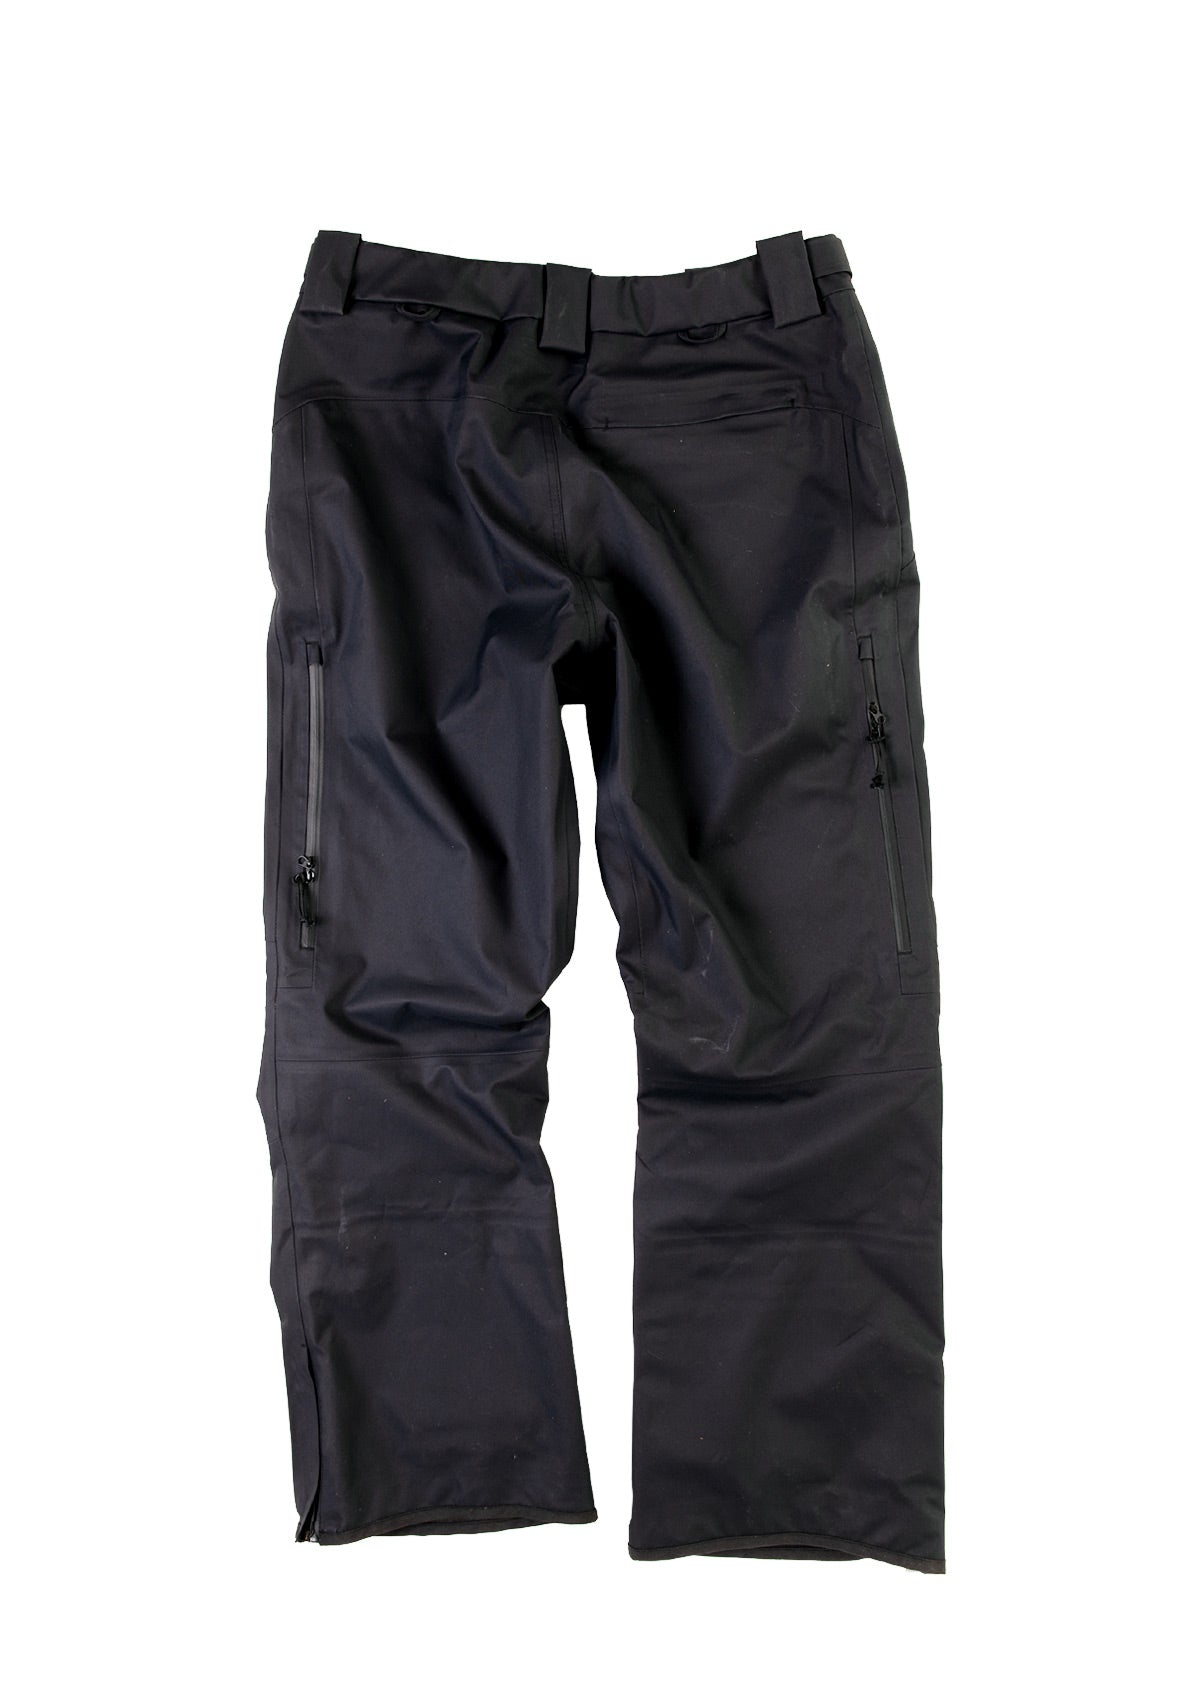 needessentials pants mountain wear ski pants all black non branded